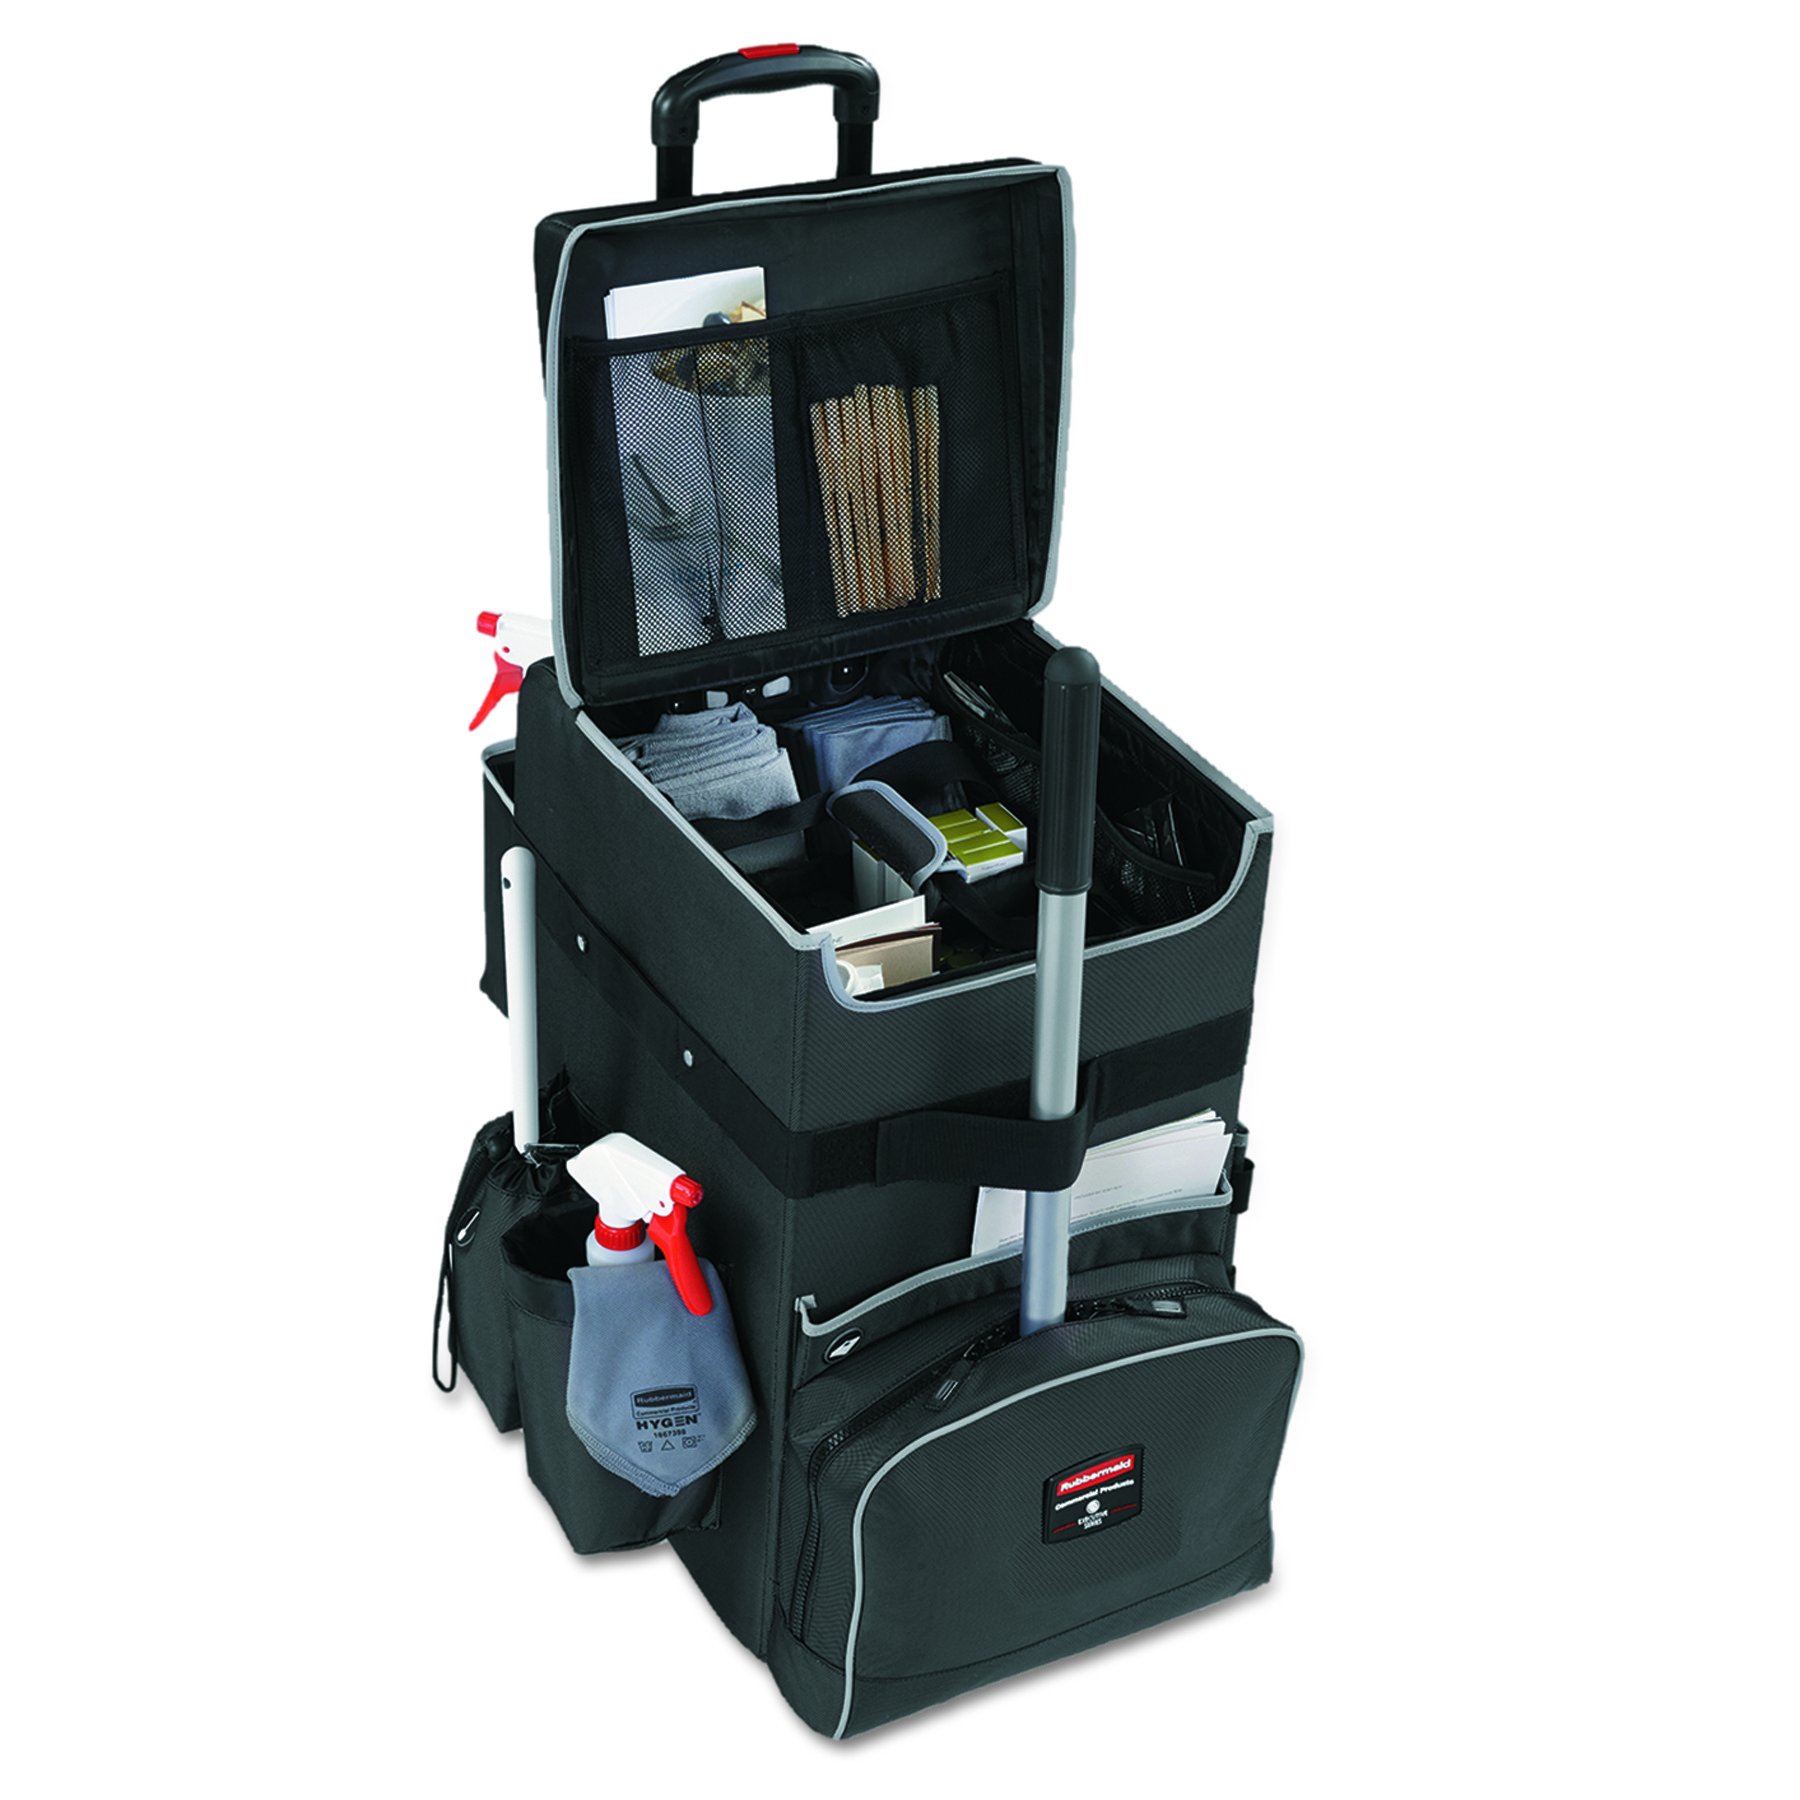 Rubbermaid Commercial Products Produkty Executive Sprzą...